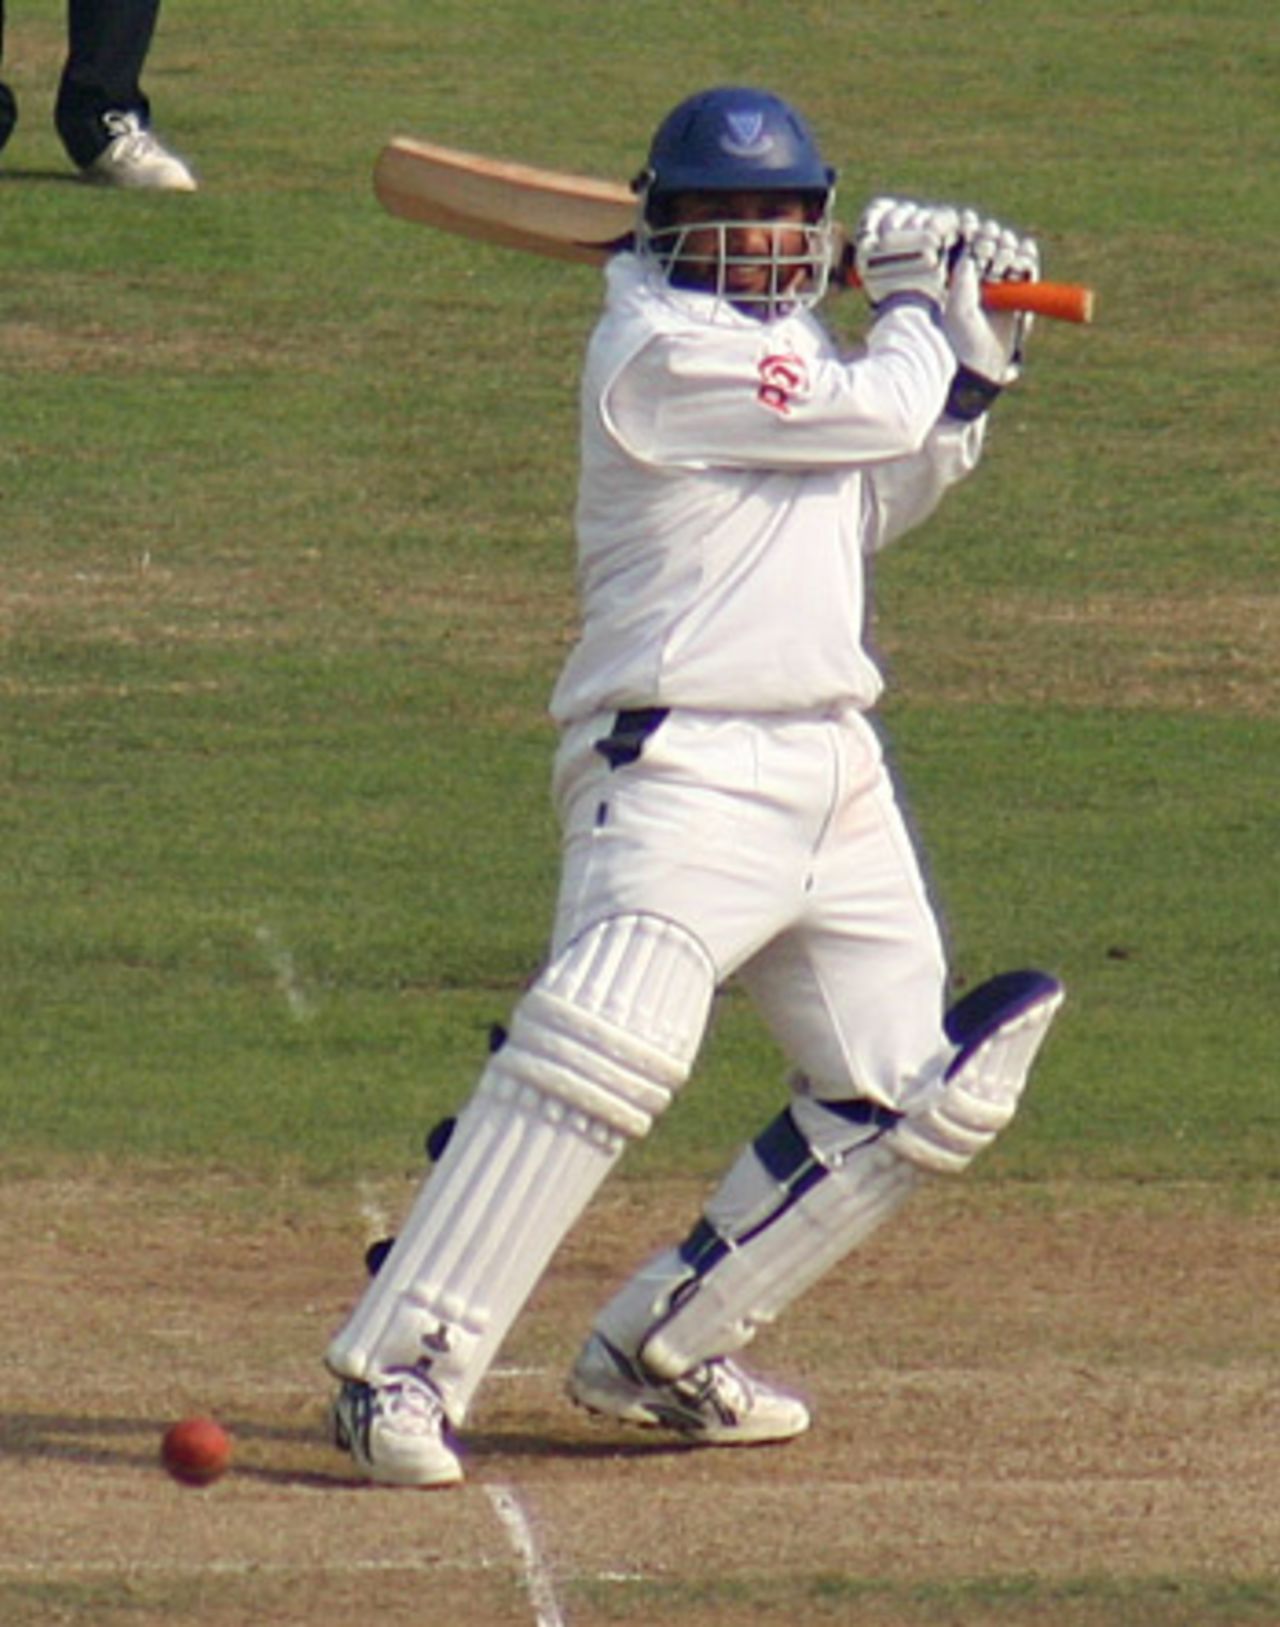 Mushtaq Ahmed cracks another boundary on his way to a career-best 90*, Sussex v Kent, Hove, September 22, 2005